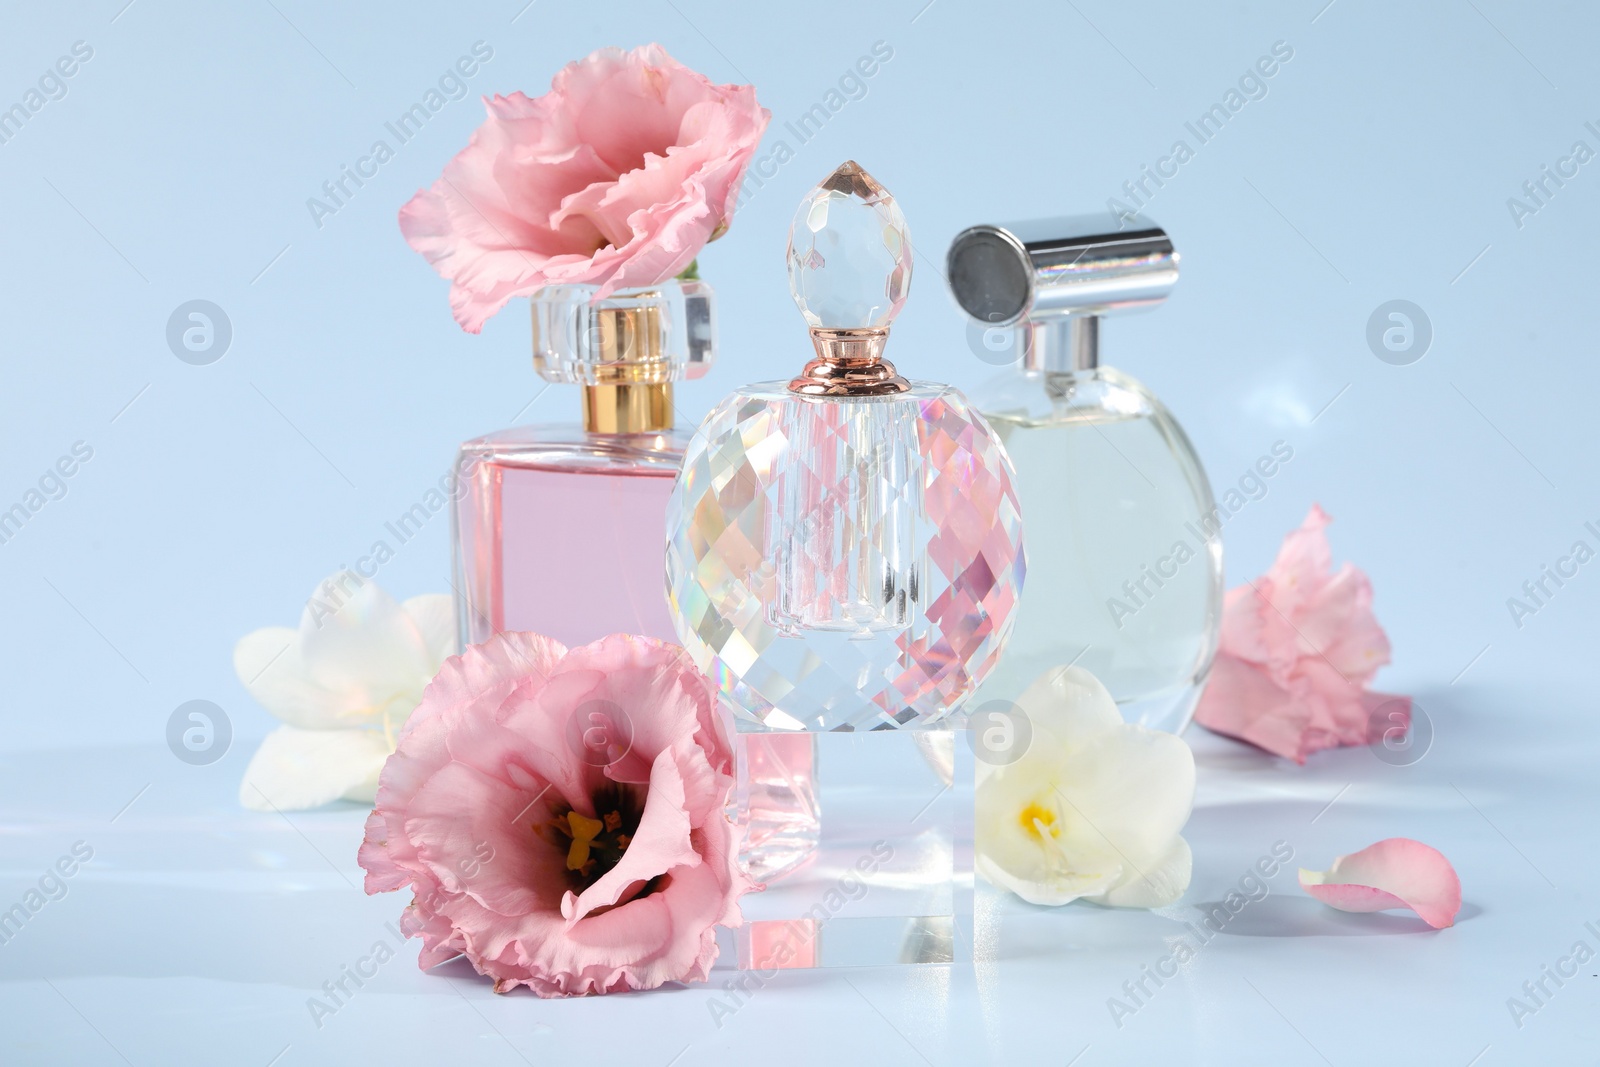 Photo of Bottles of luxury perfumes and floral decor on light blue background